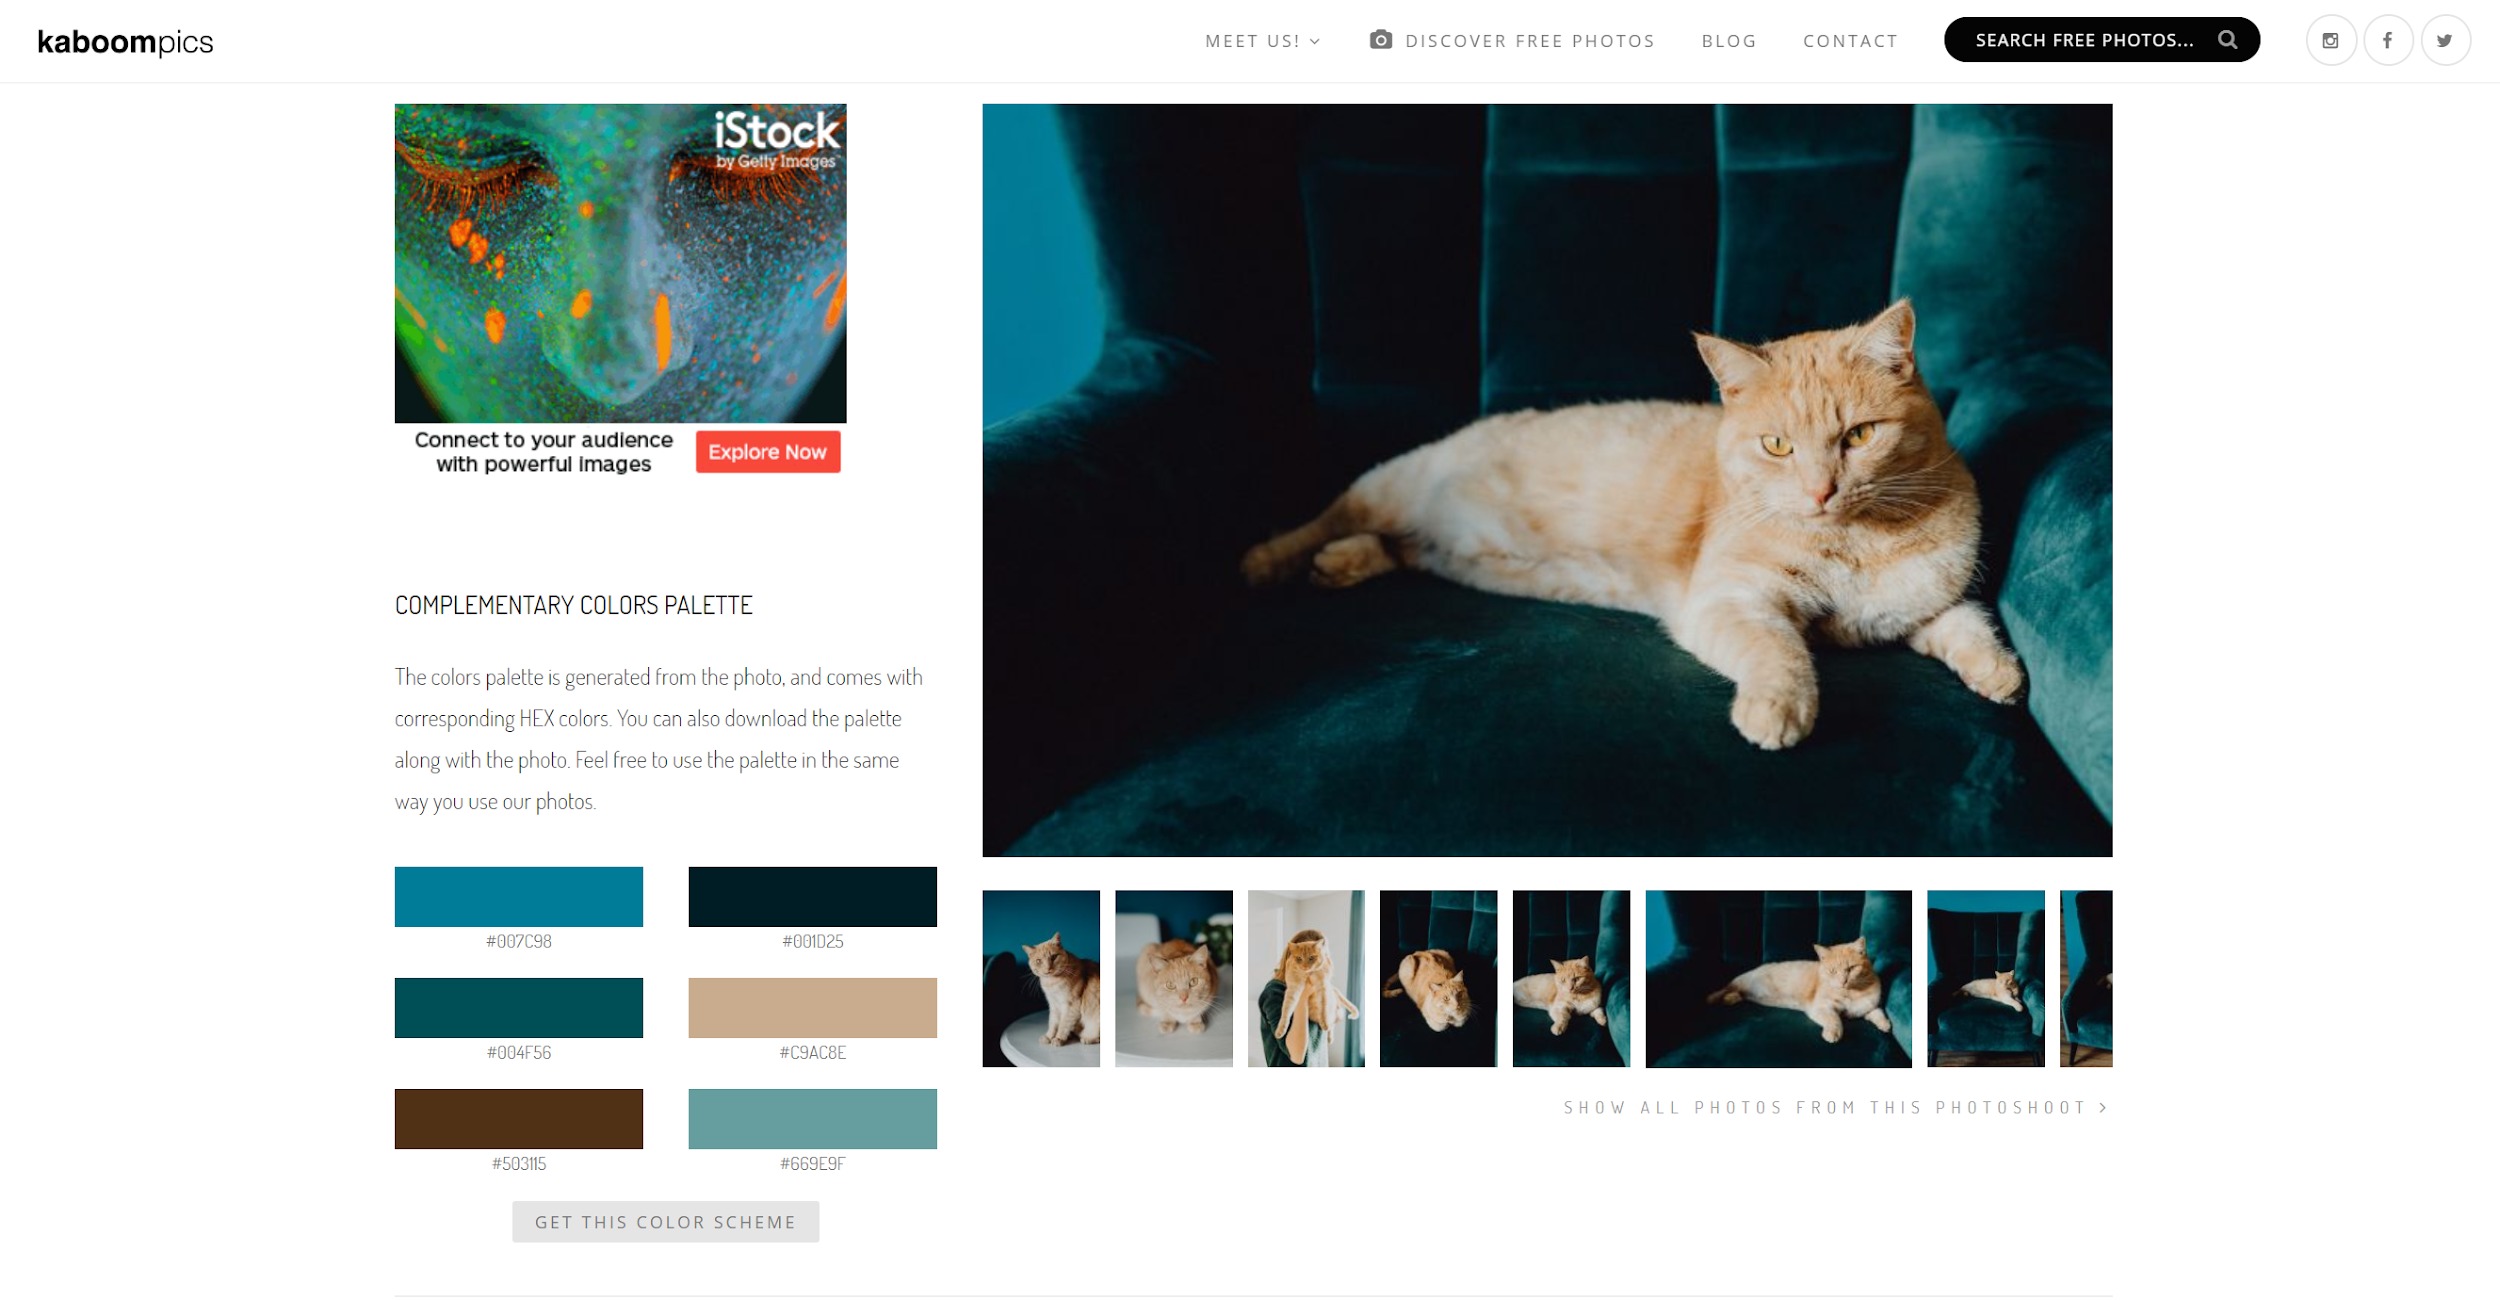 Where to find free stock photos online - Kaboompics Color Palette